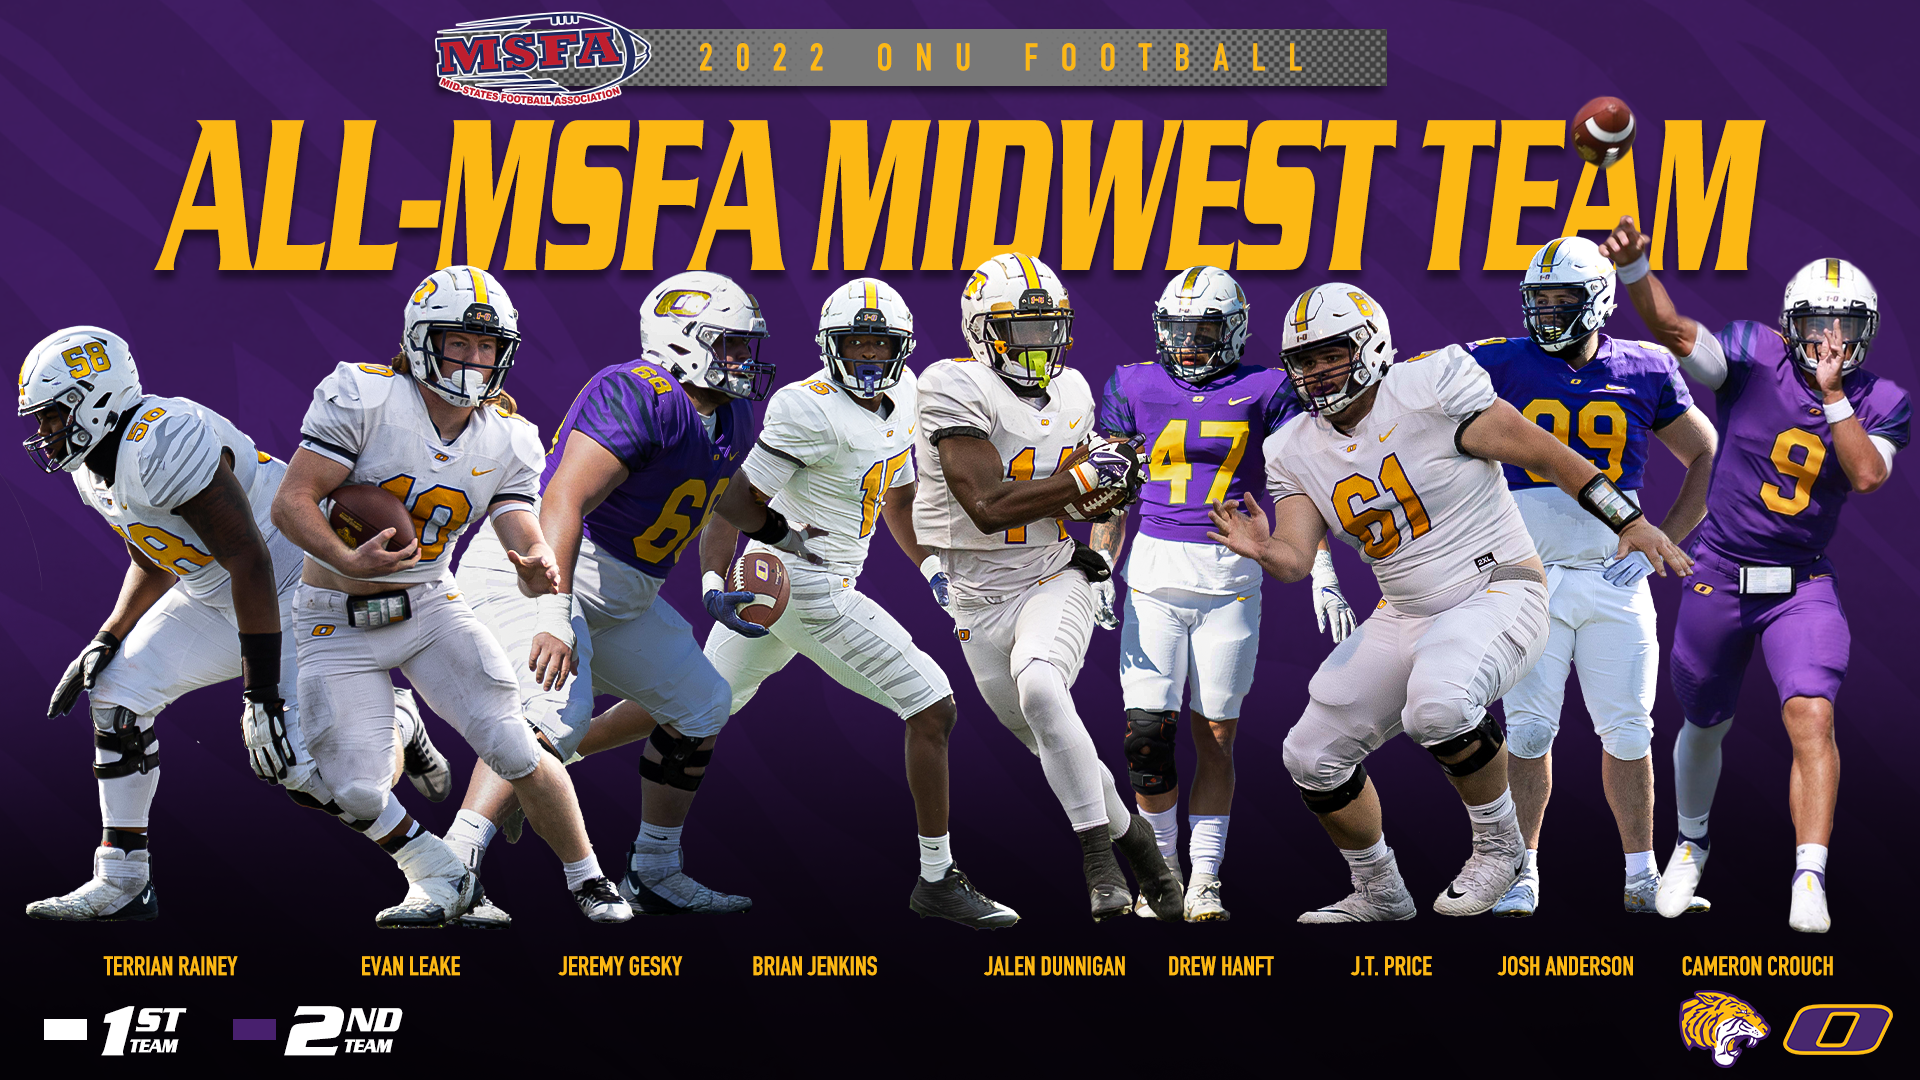 ONU RECOGNIZED IN MSFA POSTSEASON AWARDS, RAINEY NAMED OFFENSIVE LINEMAN OF THE YEAR